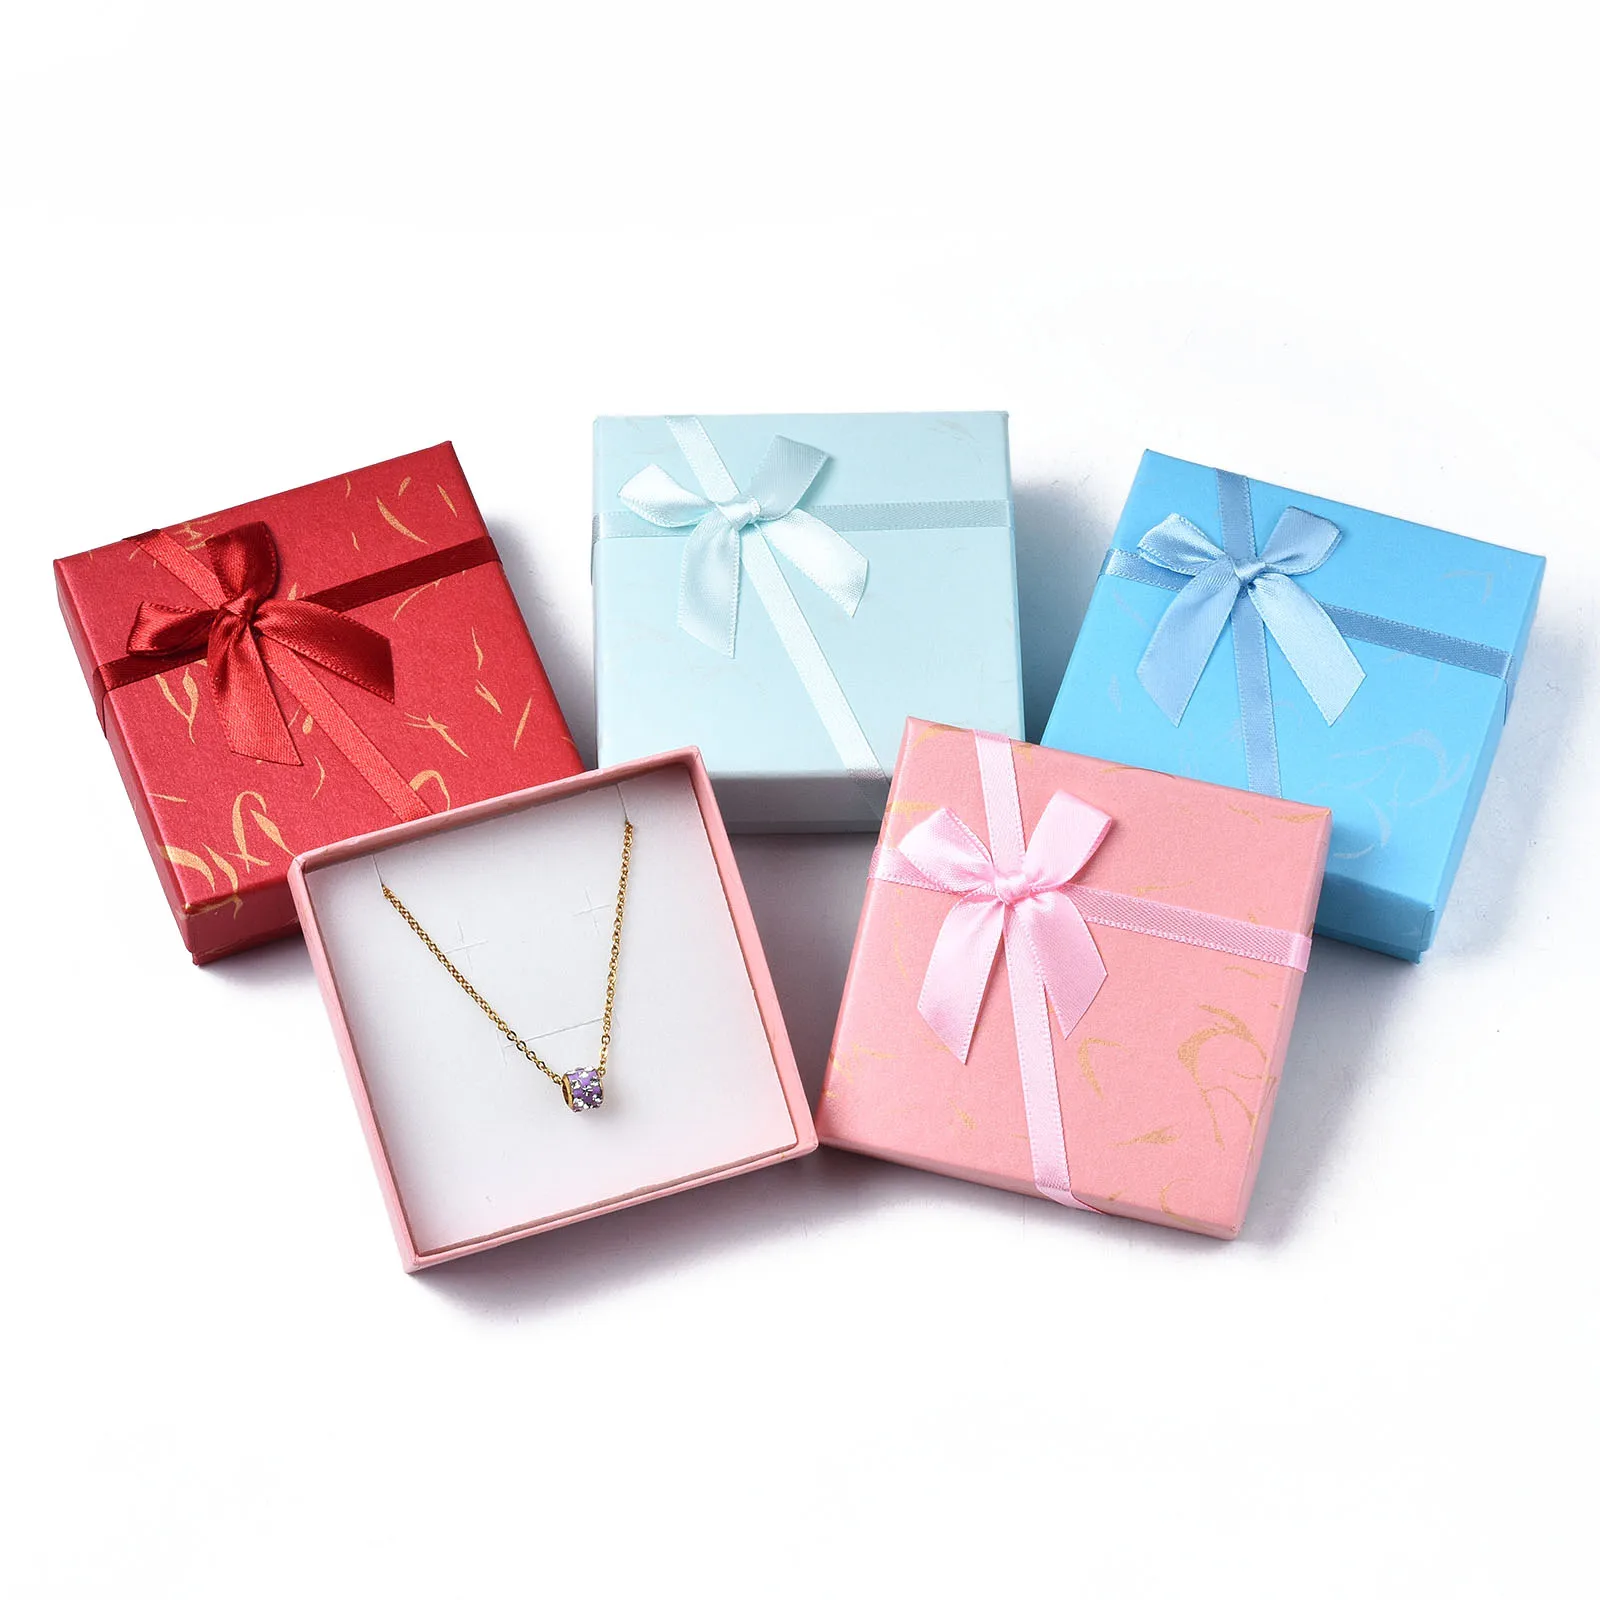 12pcs Square Jewelry Set Cardboard Box Mixed Color with Bowknot Gift Box For Necklaces Earrings Rings DIY Packaging 9x9x3cm